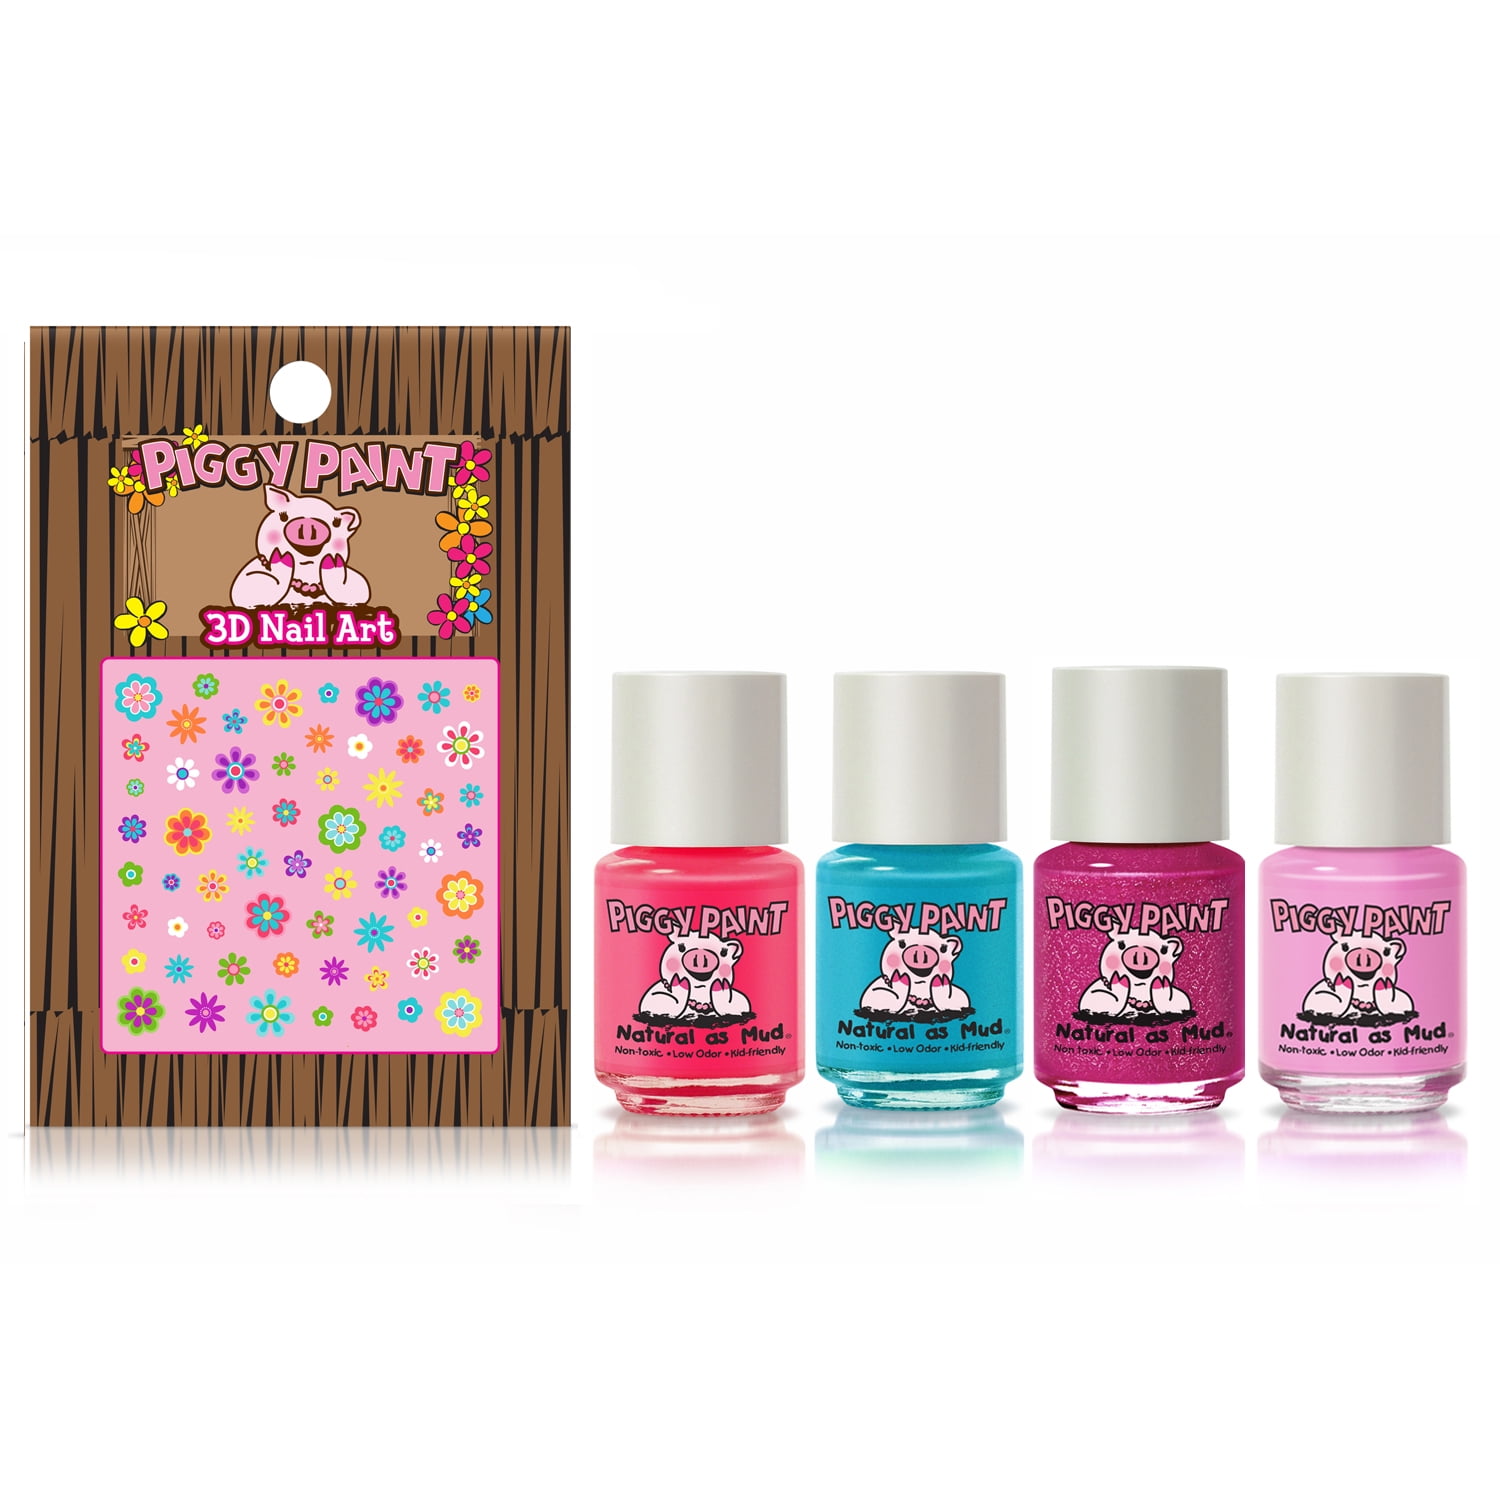 Piggy Paint 100% Non-toxic Girls Nail Polish - Safe, Chemical Free Low Odor  for Kids, Sometimes Sweet - Walmart.com